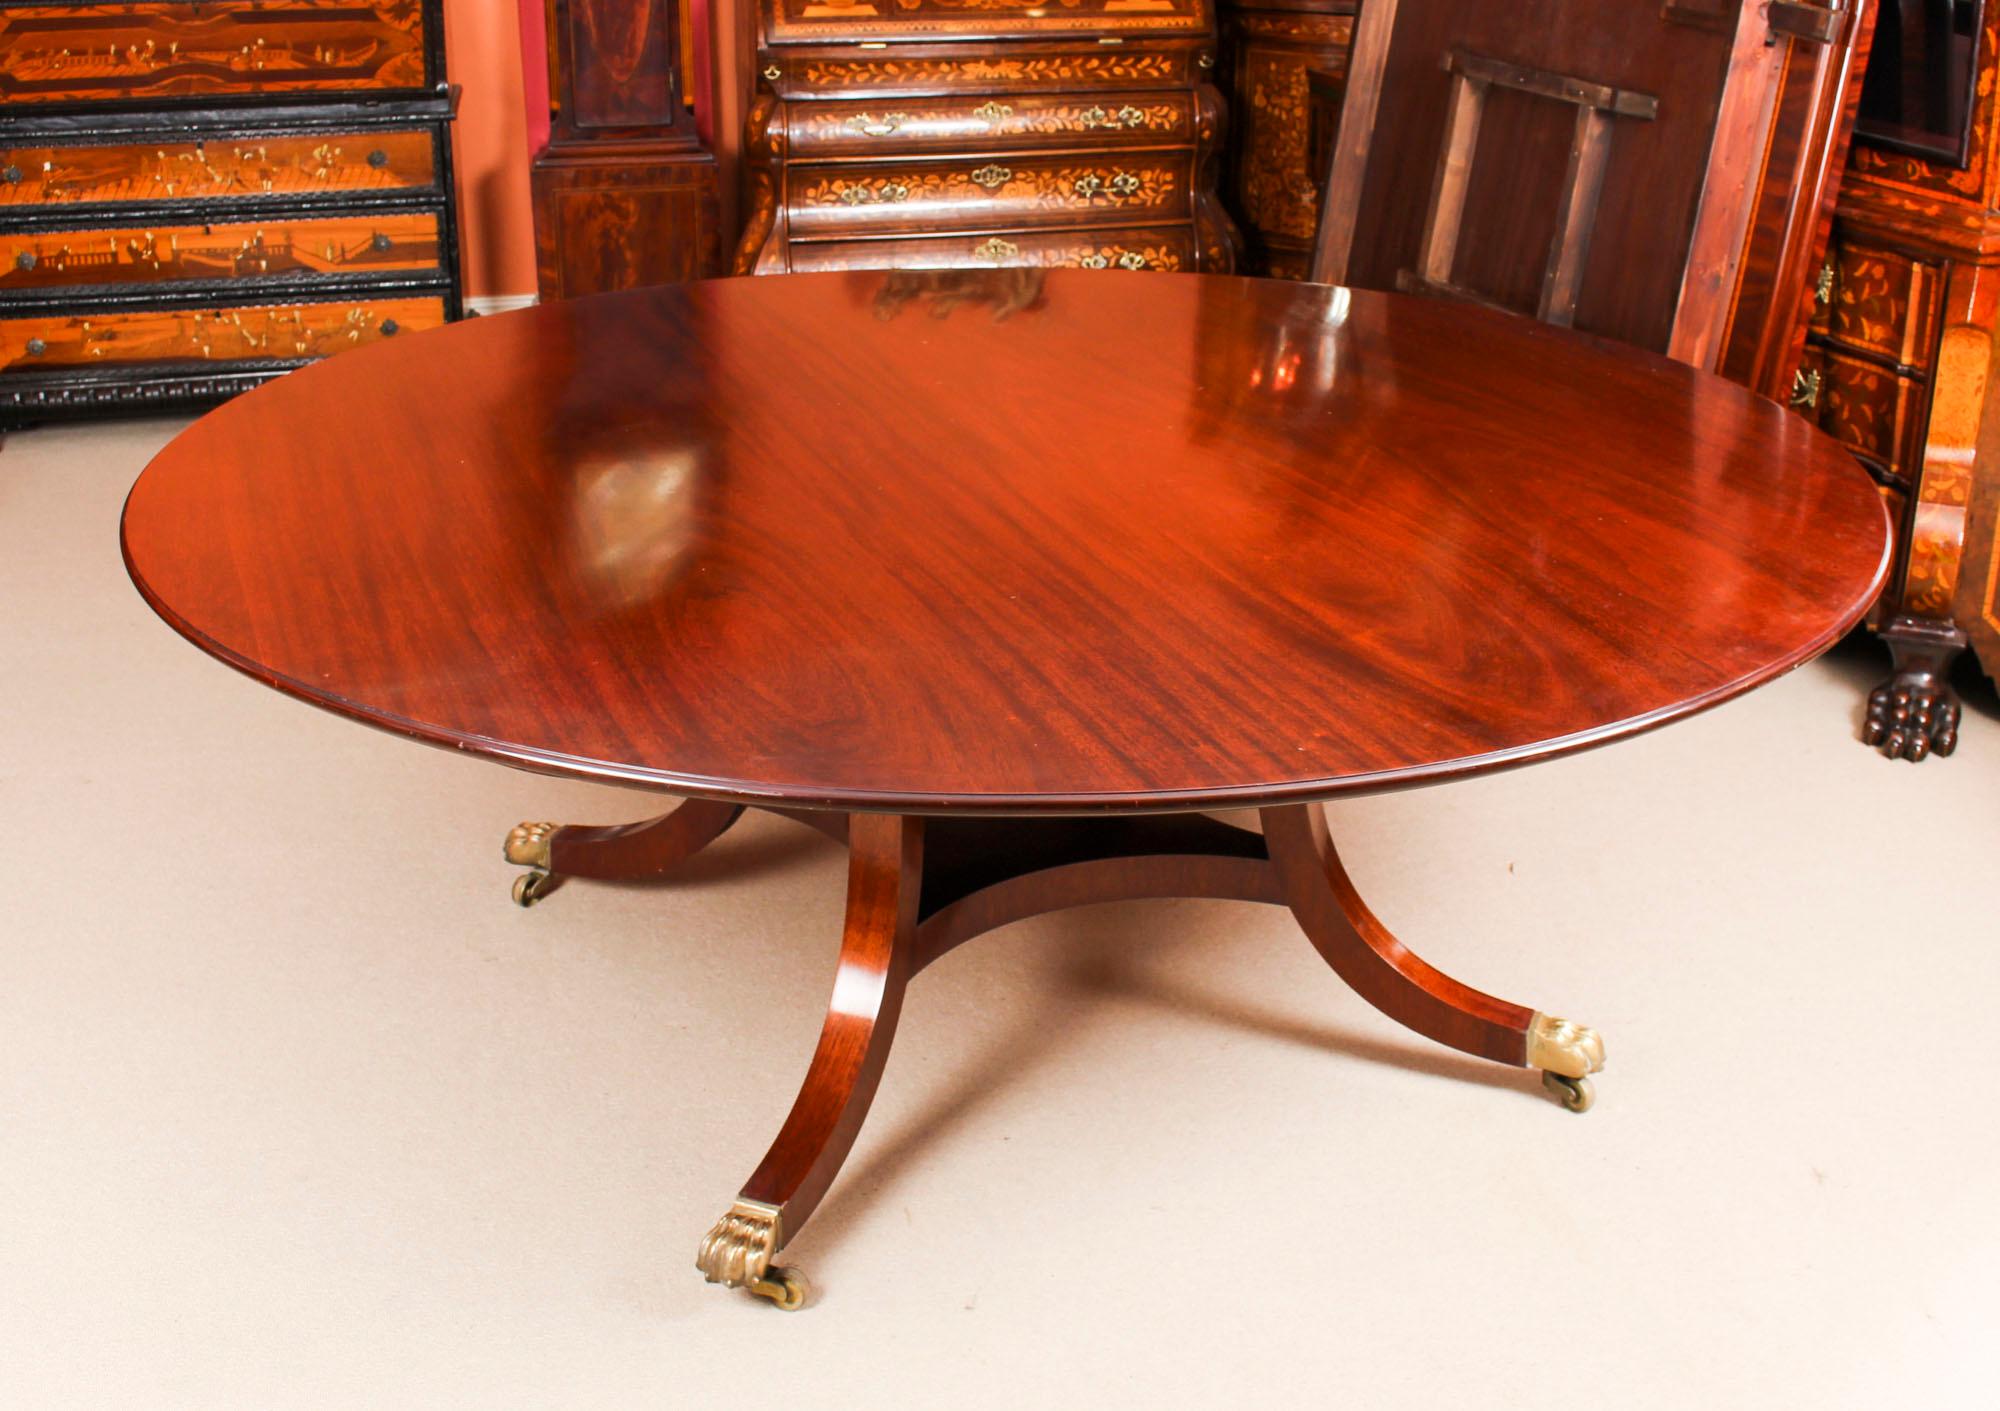 Regency Vintage Round Table and 8 Chairs William Tillman, 20th Century